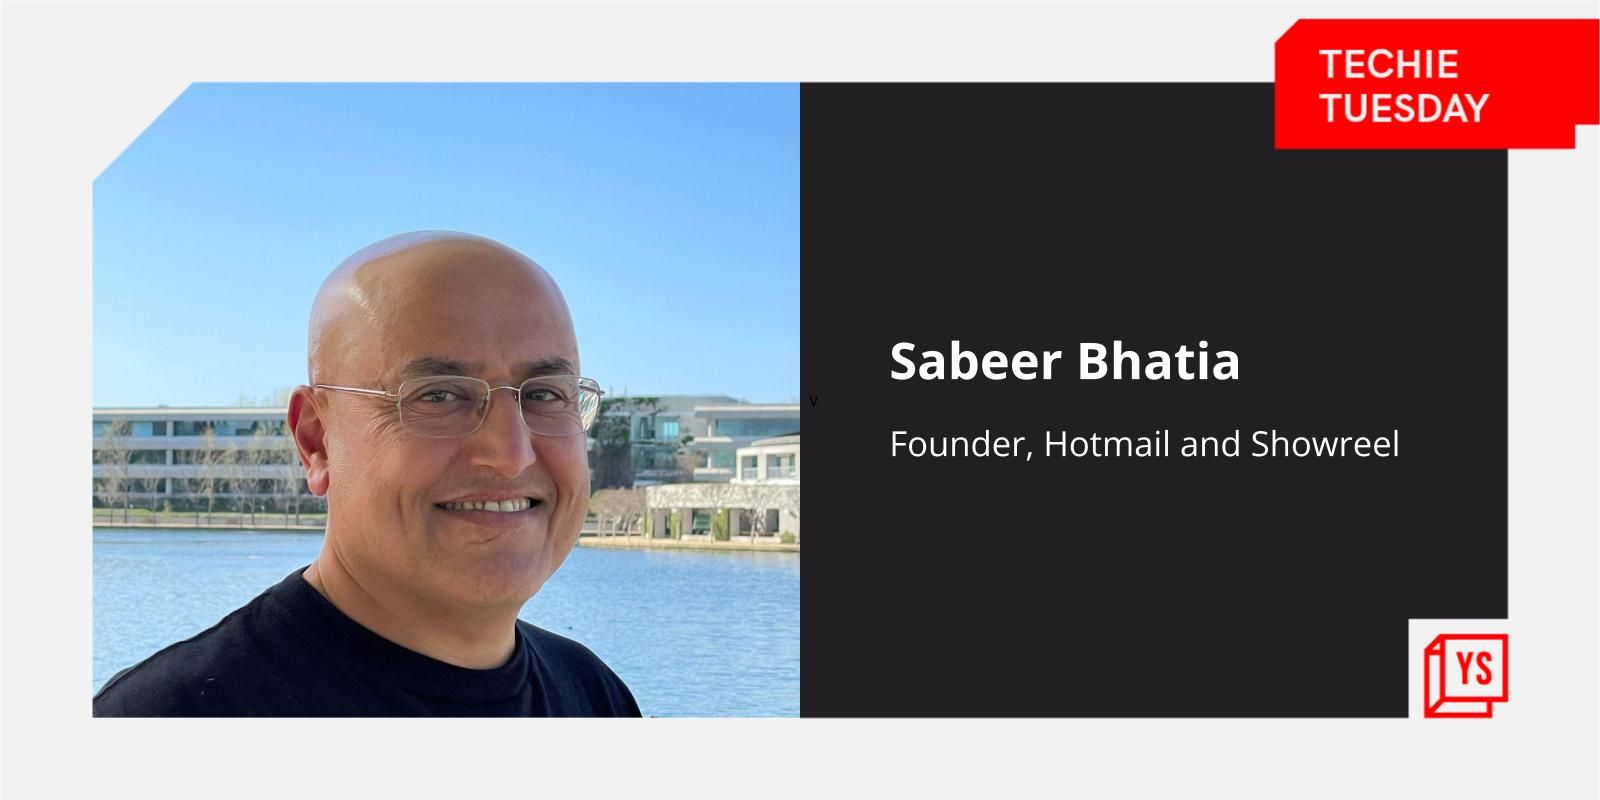 [Techie Tuesday] From Hotmail to now Showreel, why Sabeer Bhatia believes there is more than one way to solve a problem 